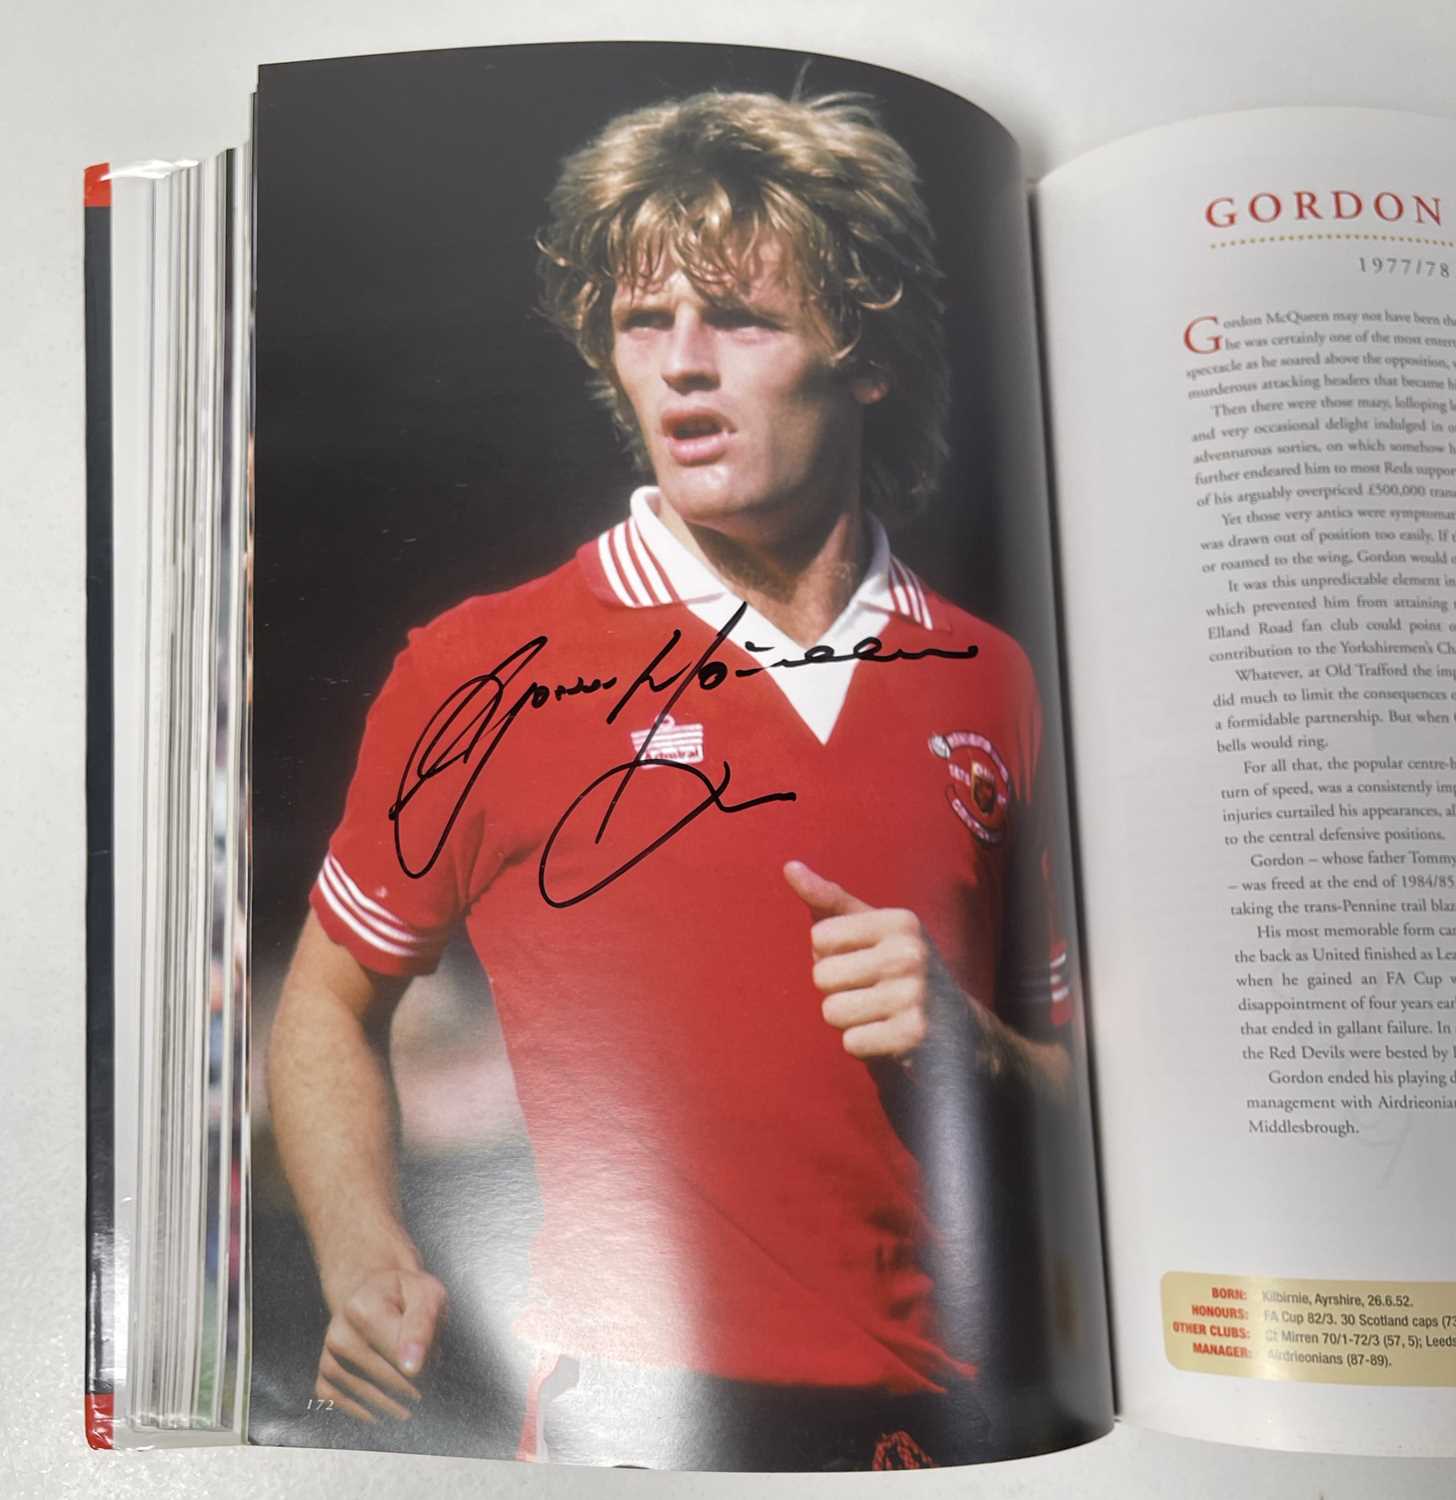 FOOTBALL MEMORABILIA - MANCHESTER UNITED MULTI SIGNED 'PLAYER BY PLAYER' BOOK. - Image 23 of 50